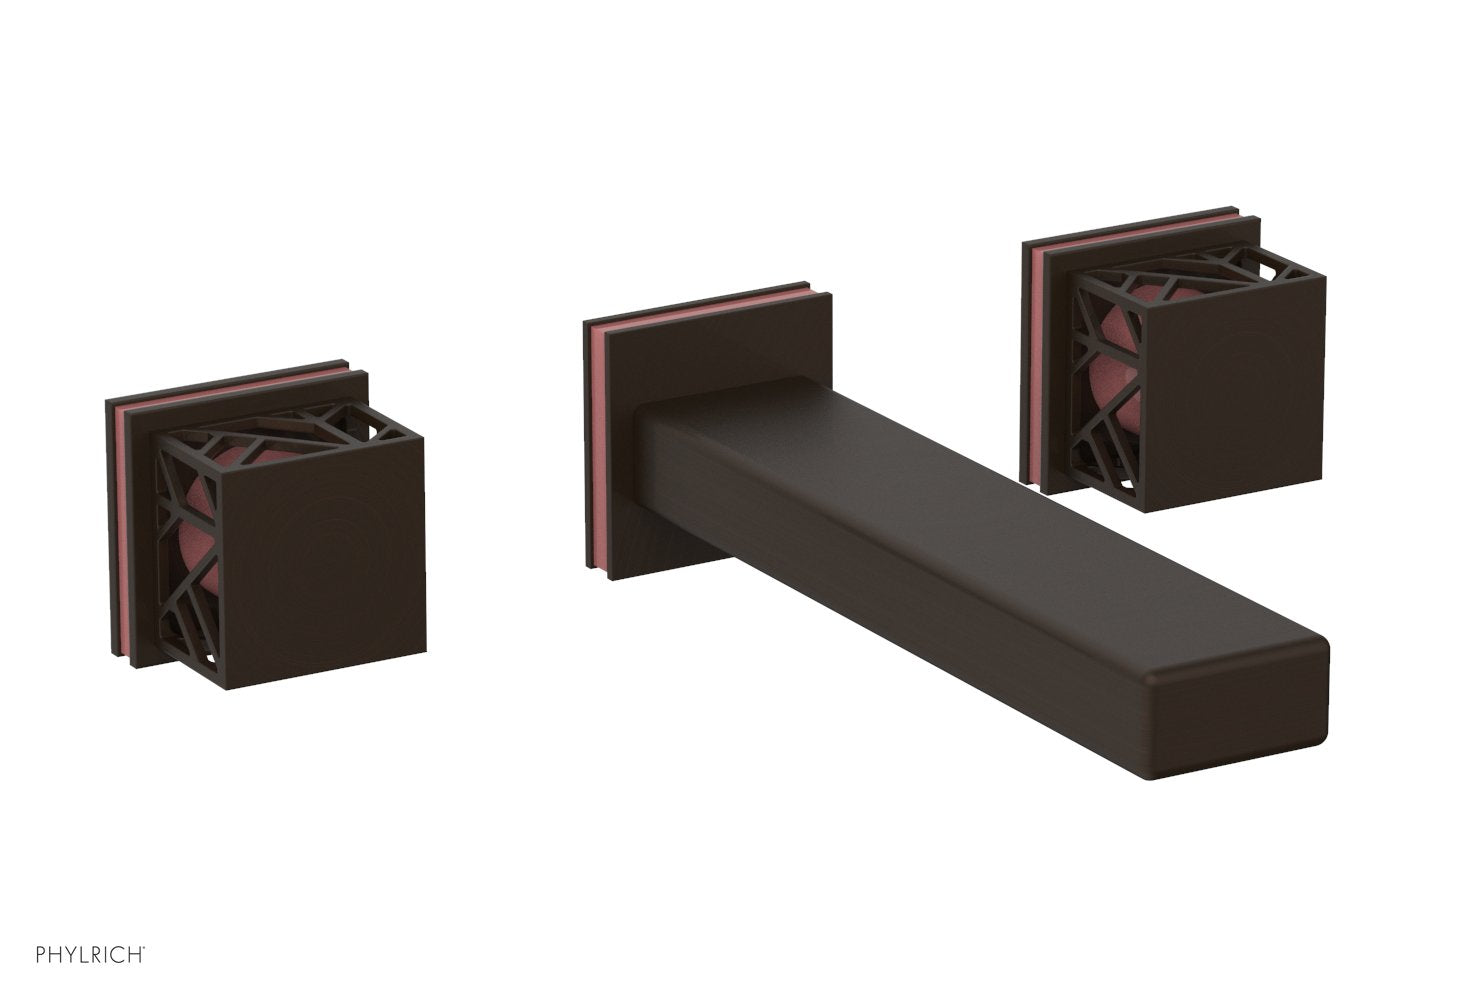 Phylrich JOLIE Wall Tub Set - Square Handles with "Pink" Accents